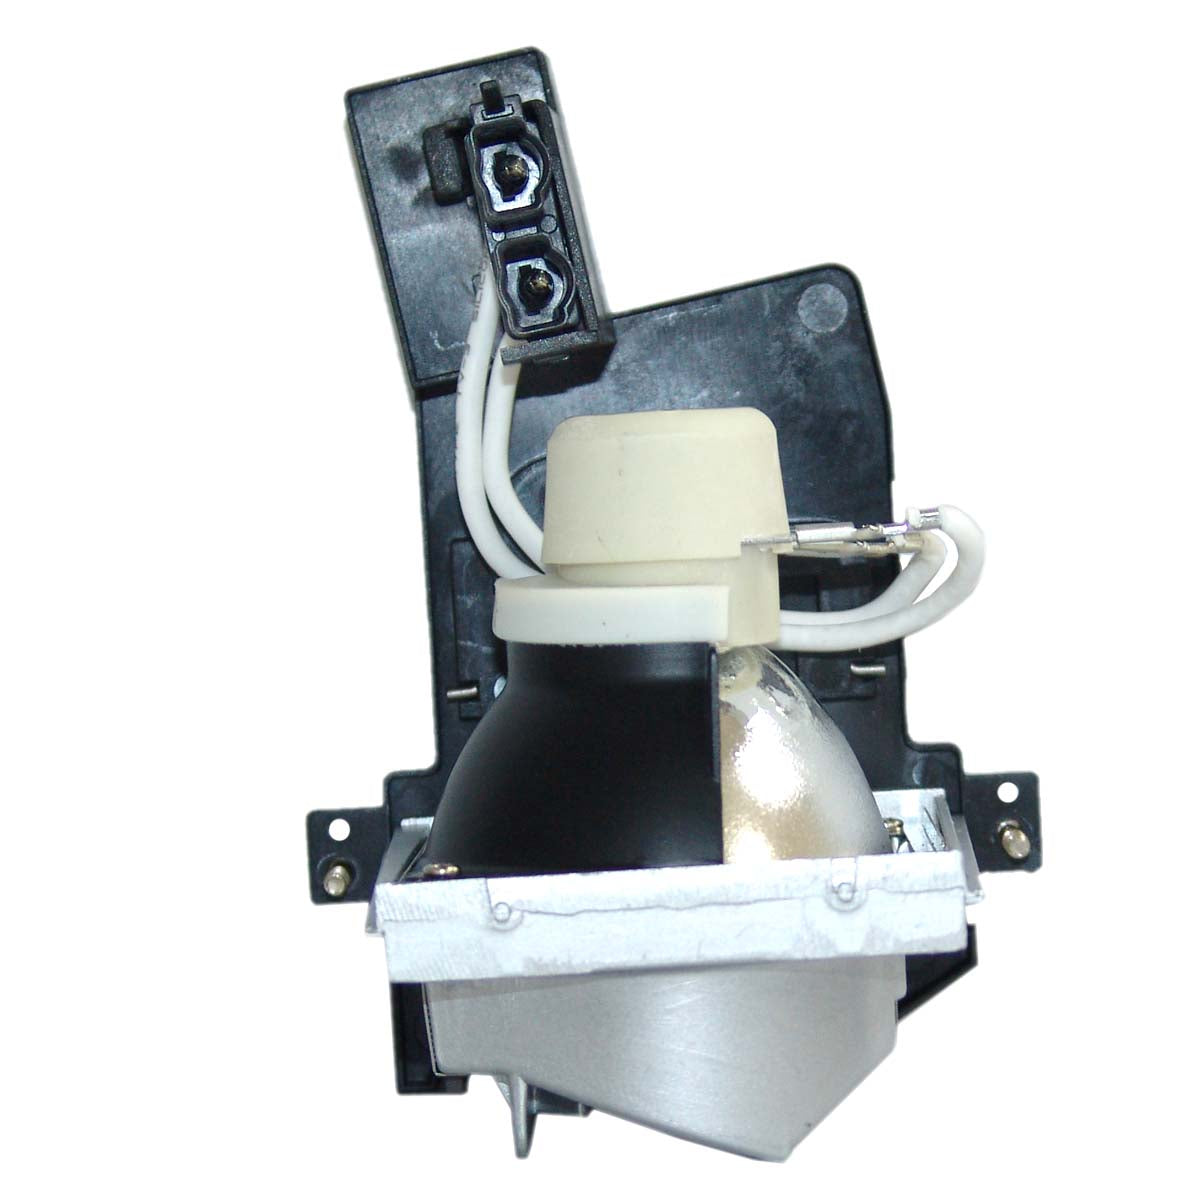 Optoma SP.87M01GC01 Philips Projector Lamp Module